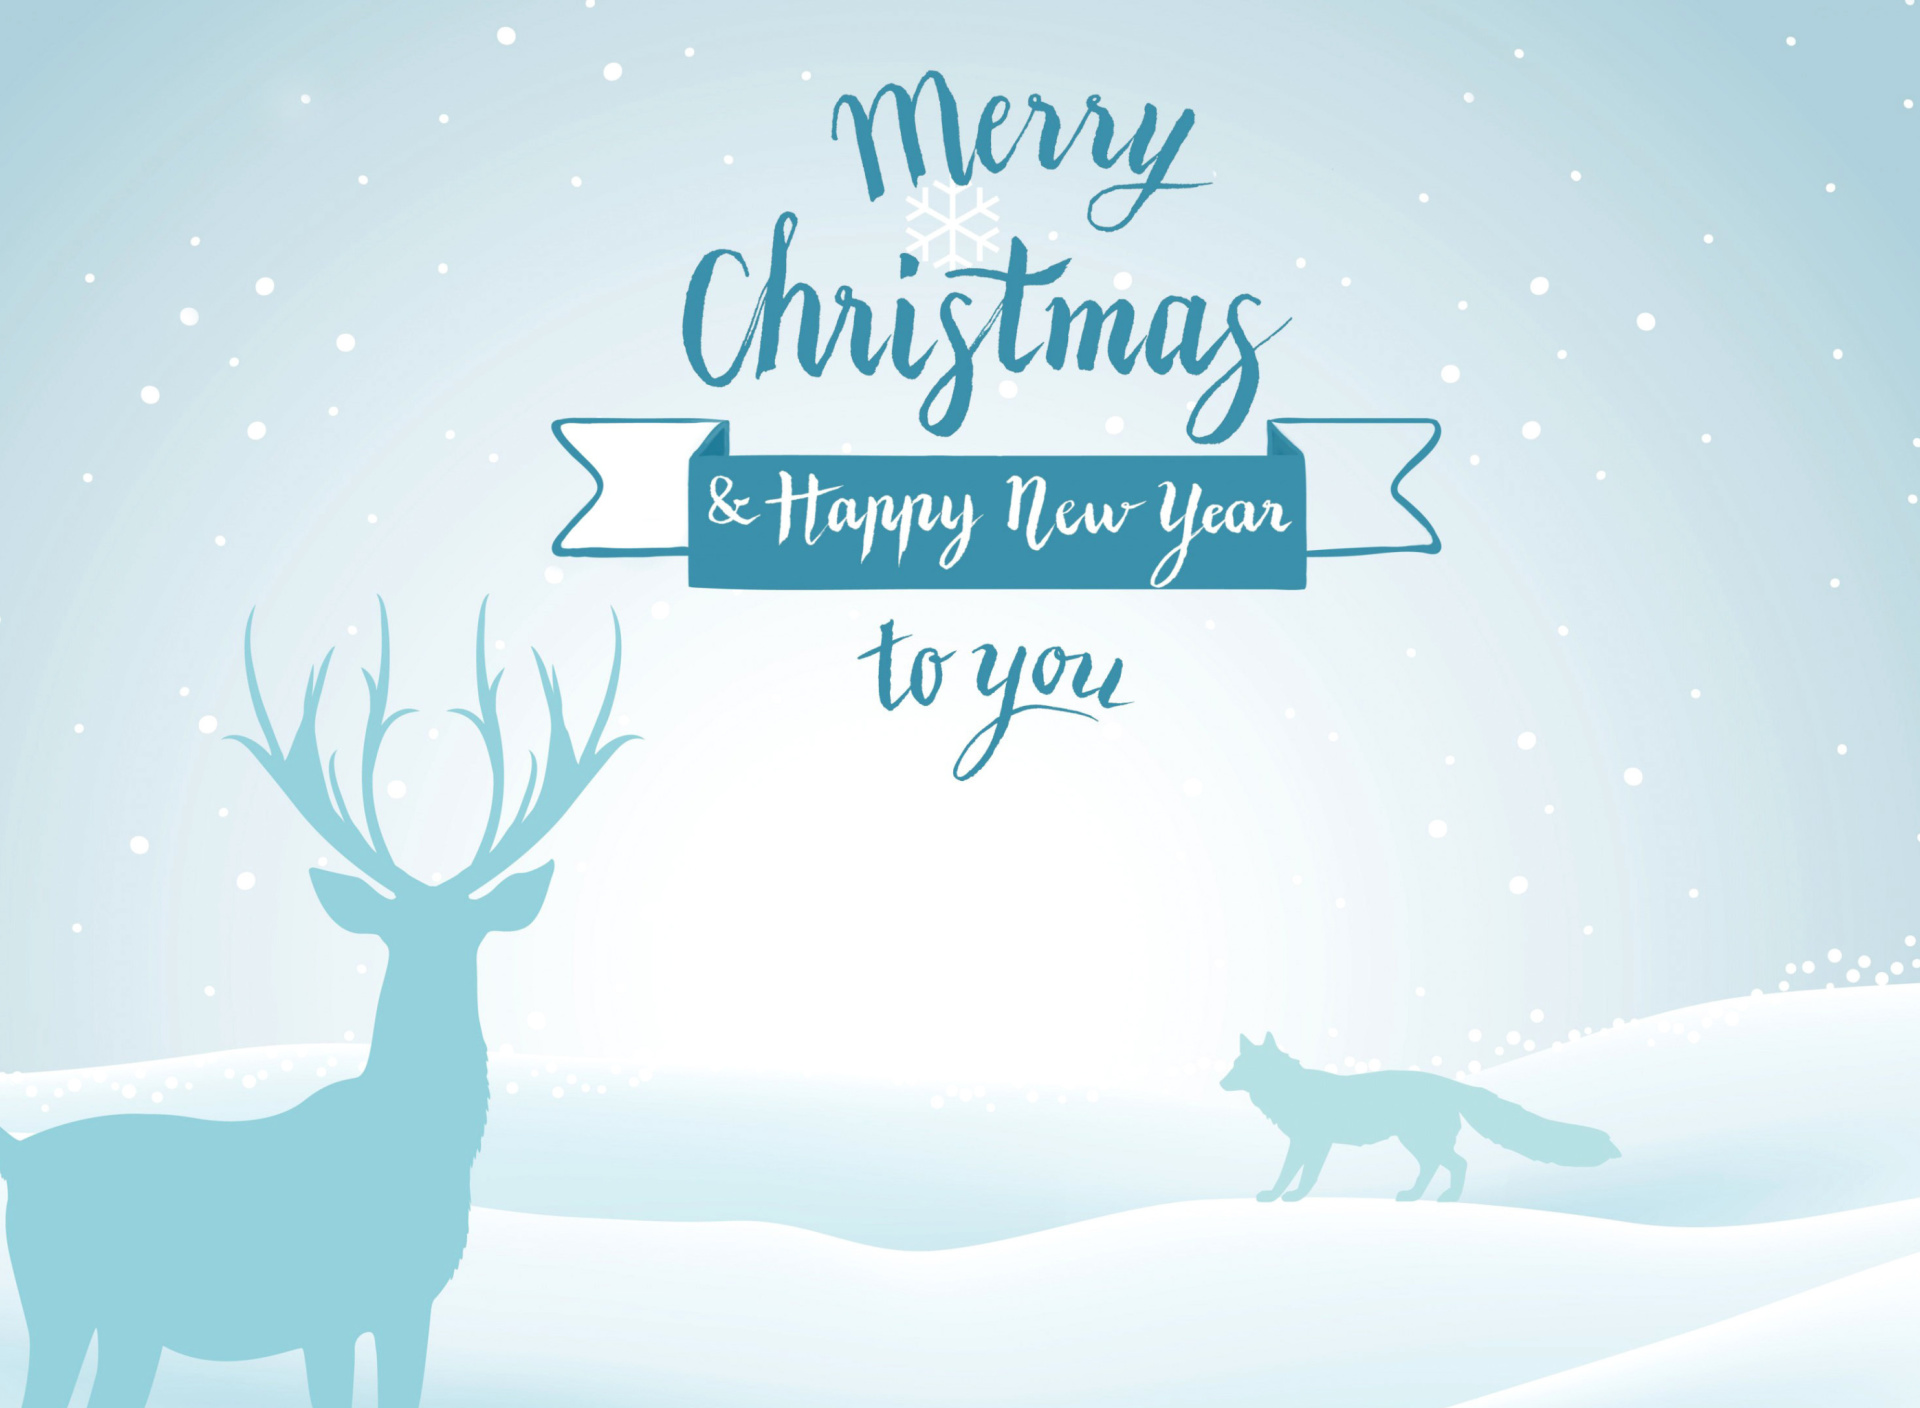 Merry Christmas and Happy New Year wallpaper 1920x1408